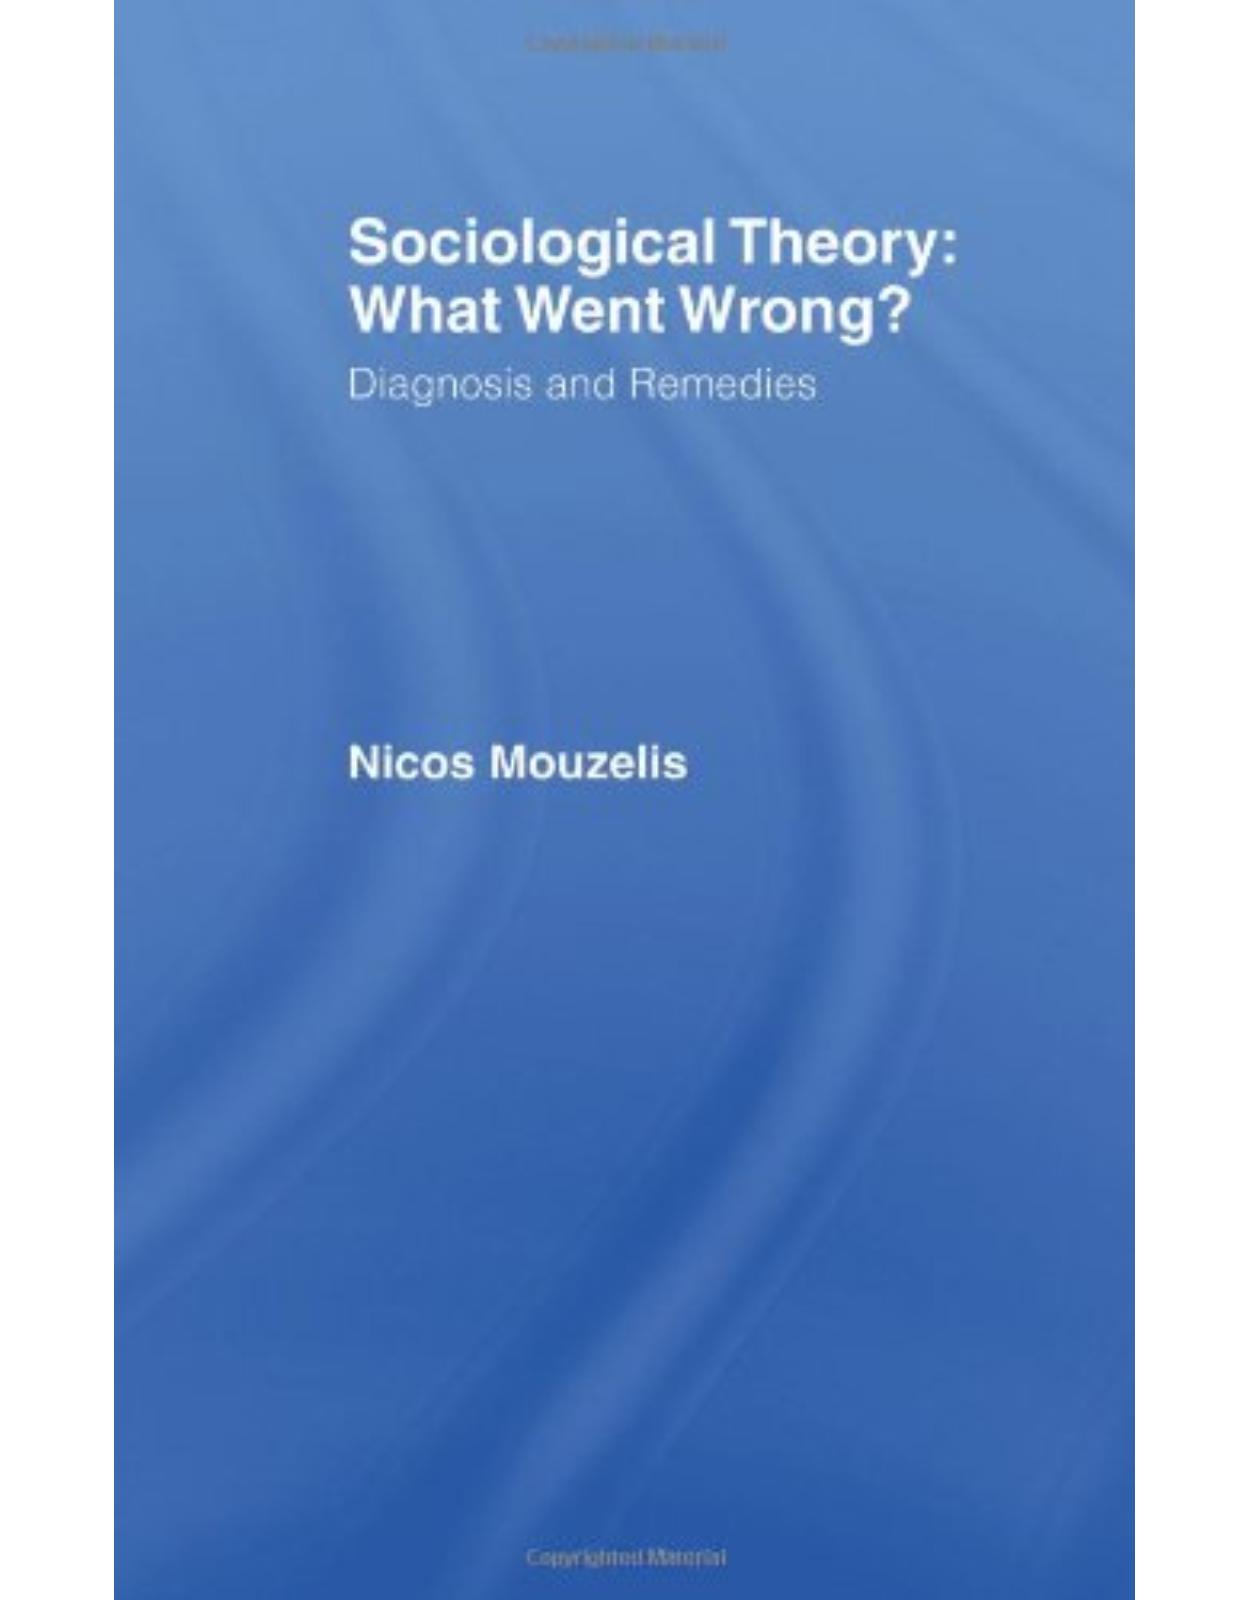 Sociological Theory: What went Wrong?: Diagnosis and Remedies (Relations)